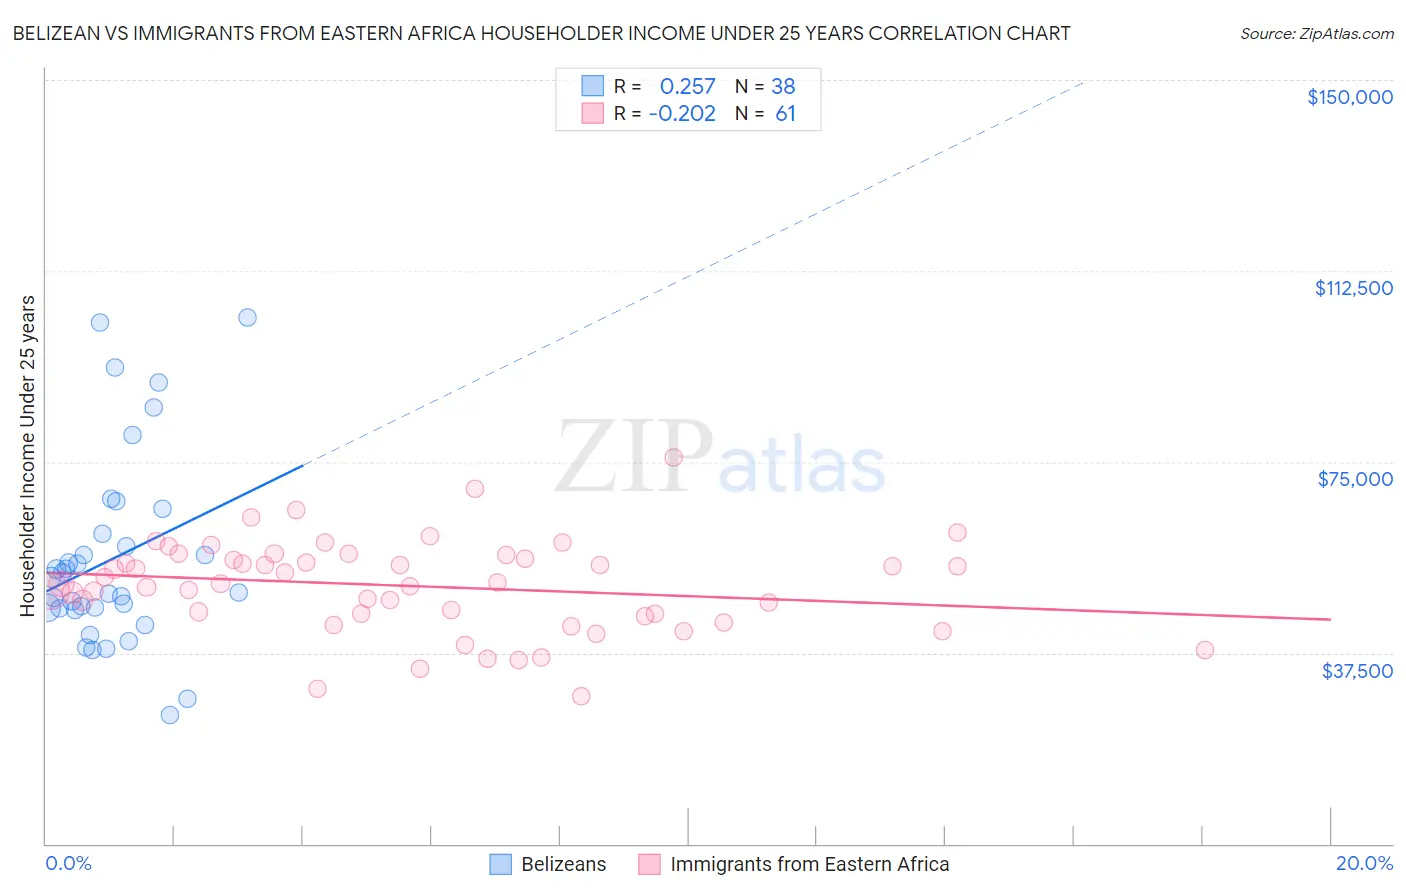 Belizean vs Immigrants from Eastern Africa Householder Income Under 25 years